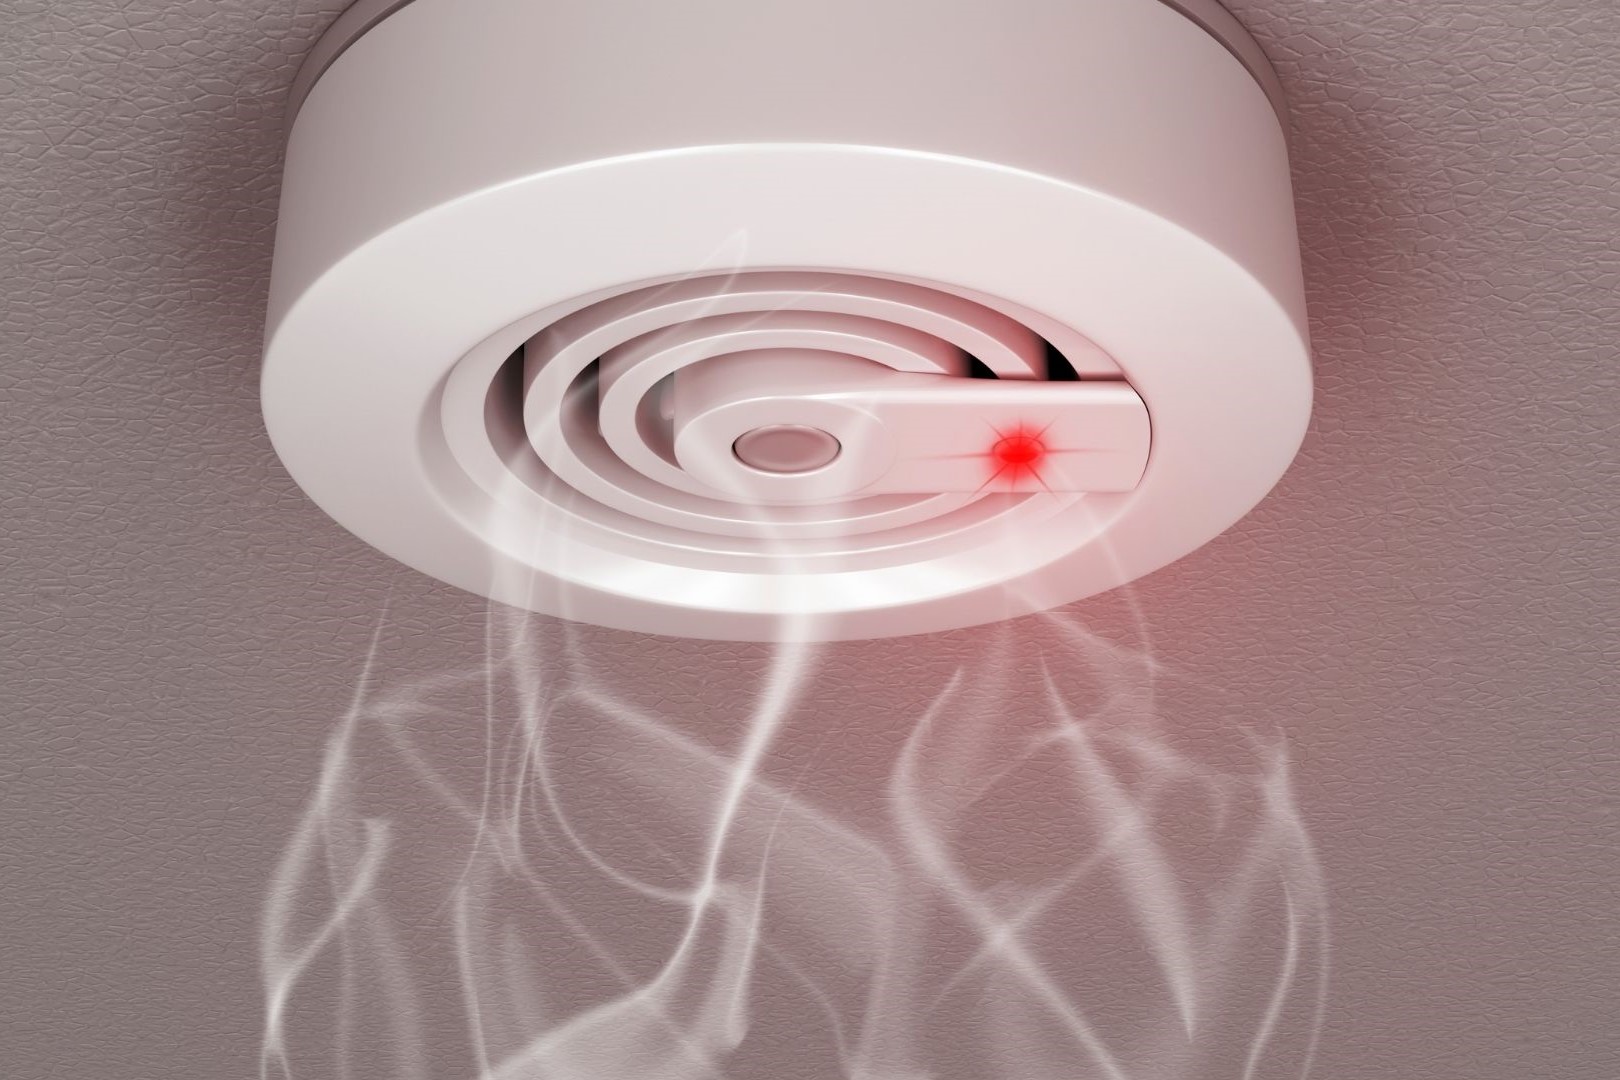 Newly Installed Smoke Detector Alarm Flashing Red - Here's Why!